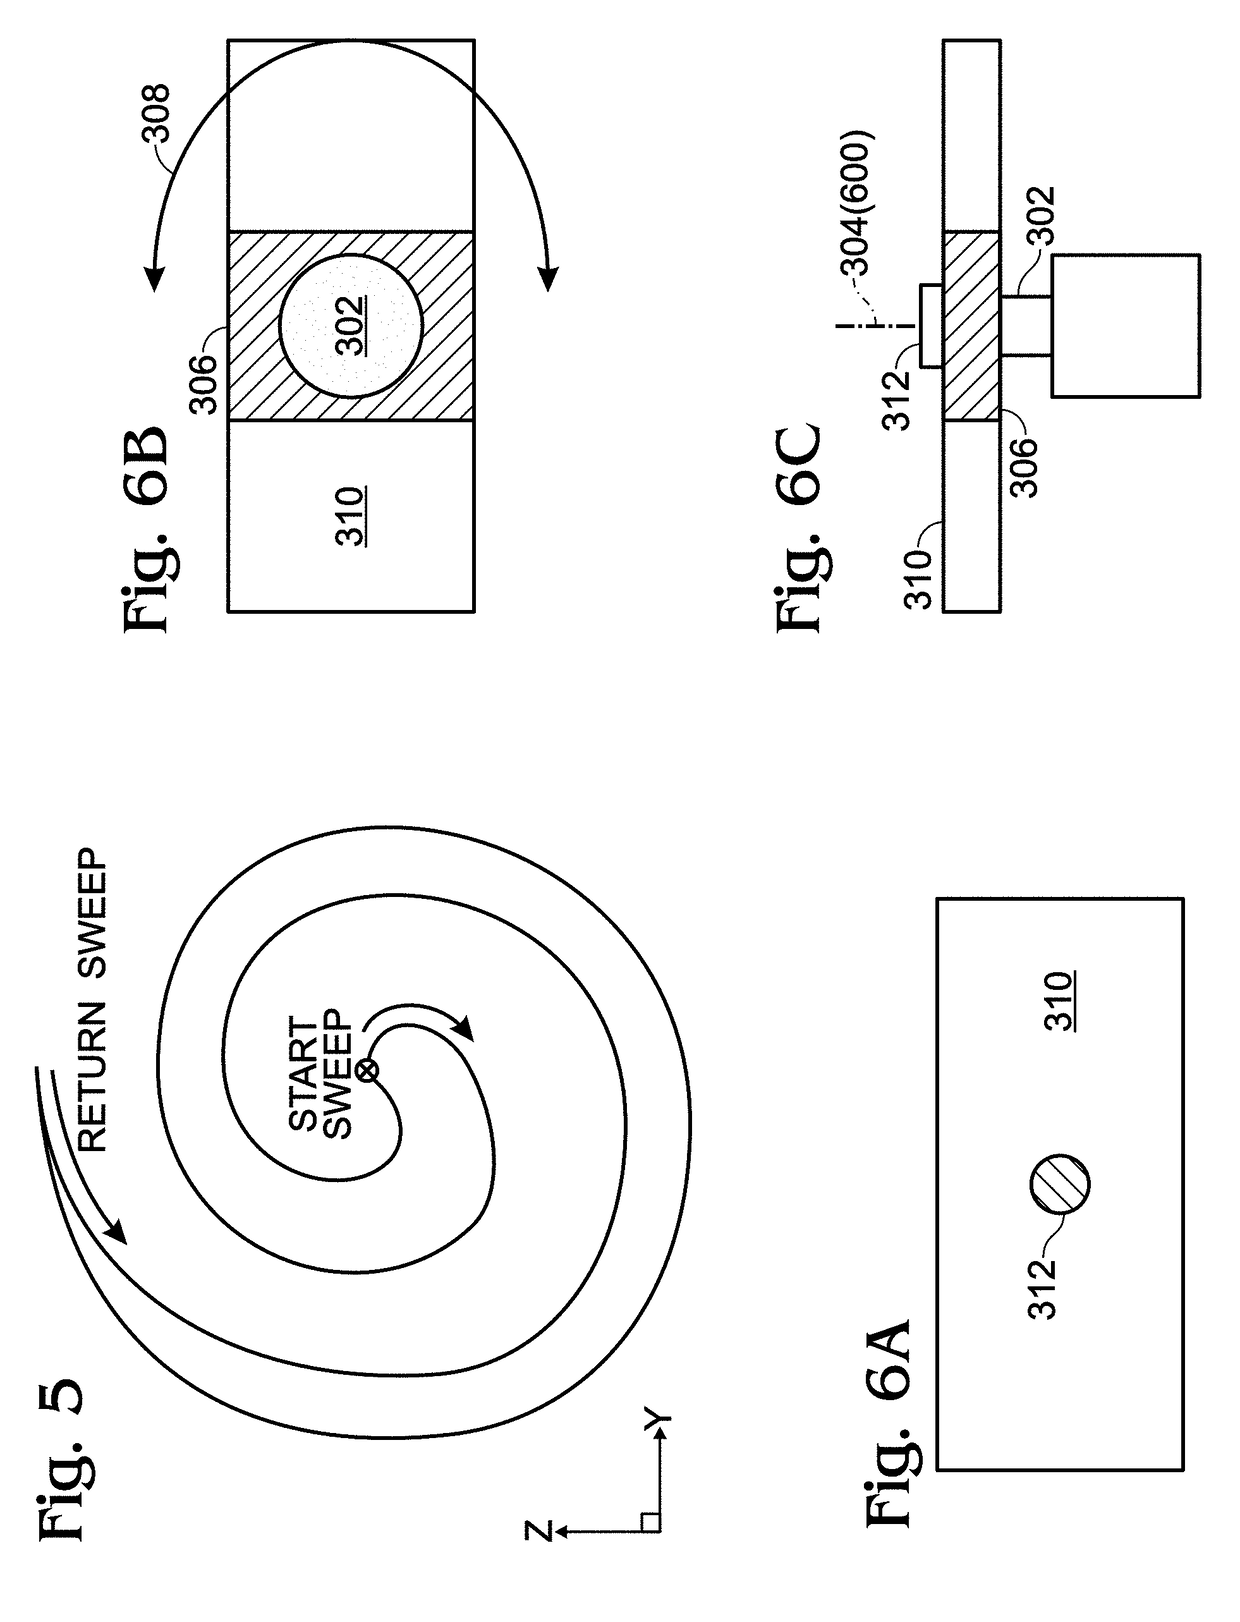 System and Method for Three-Dimensional Mapping using Two-dimensional LiDAR Laser Ranging